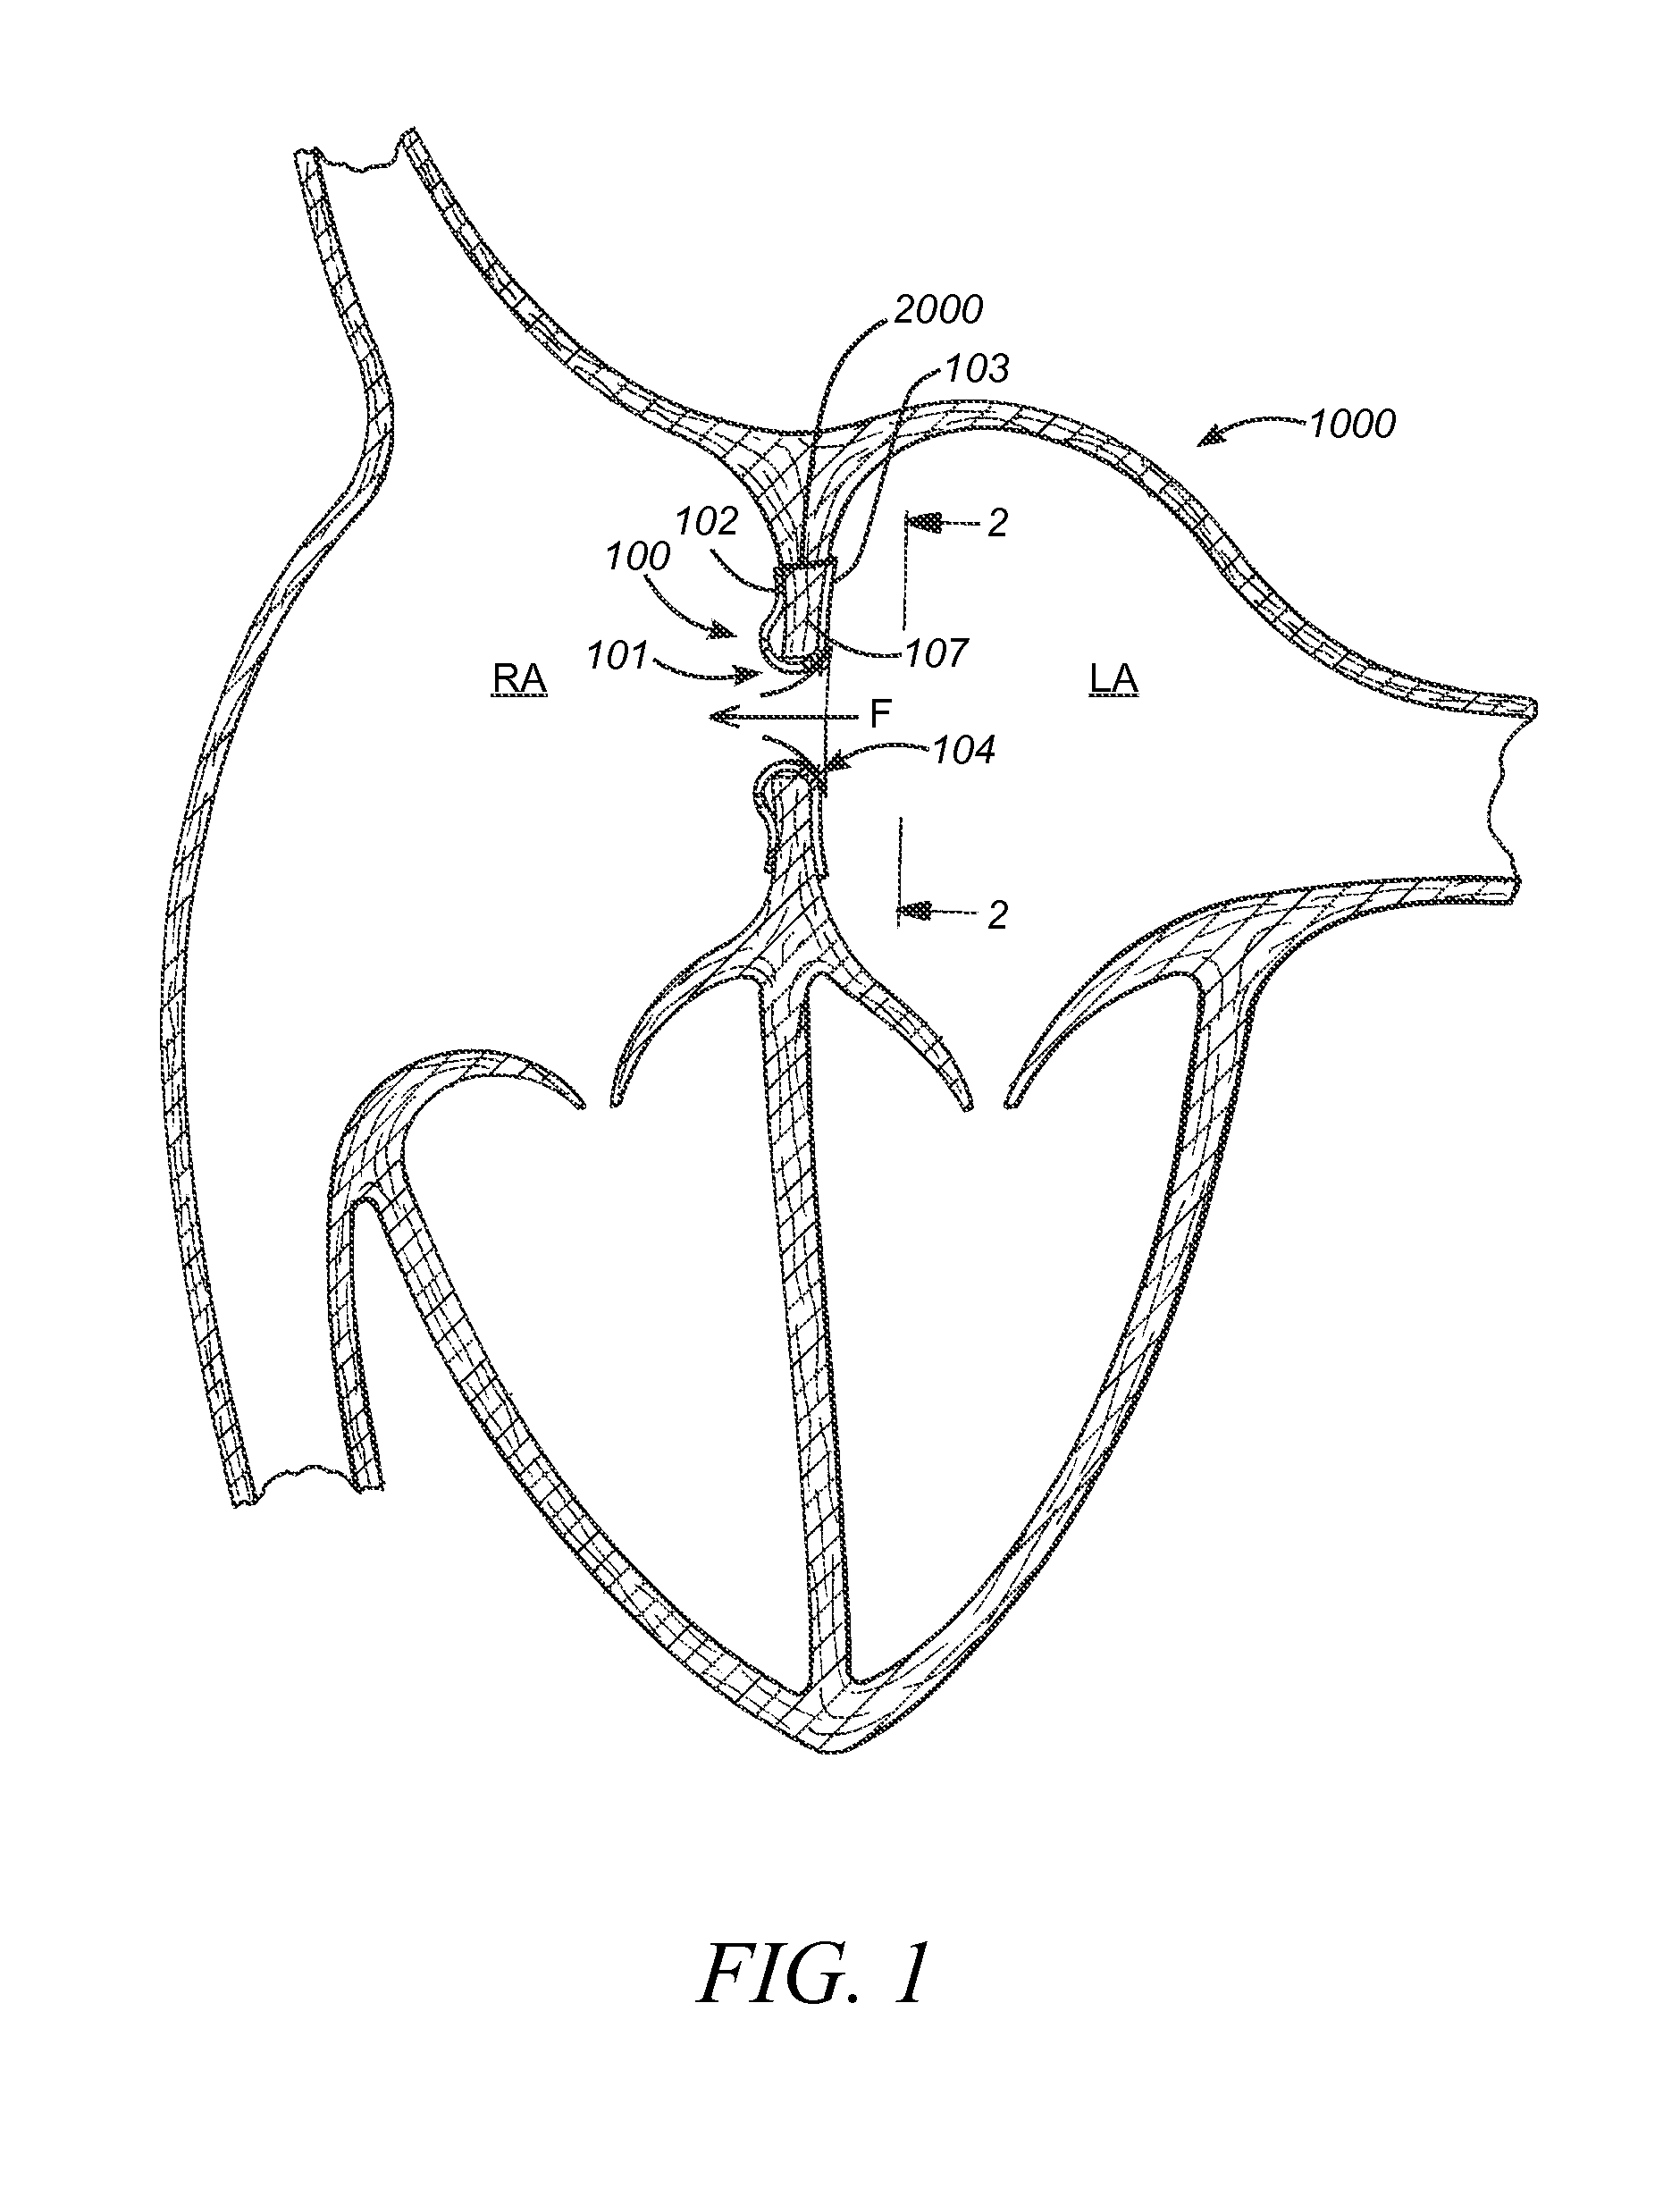 Devices, systems and methods to treat heart failure